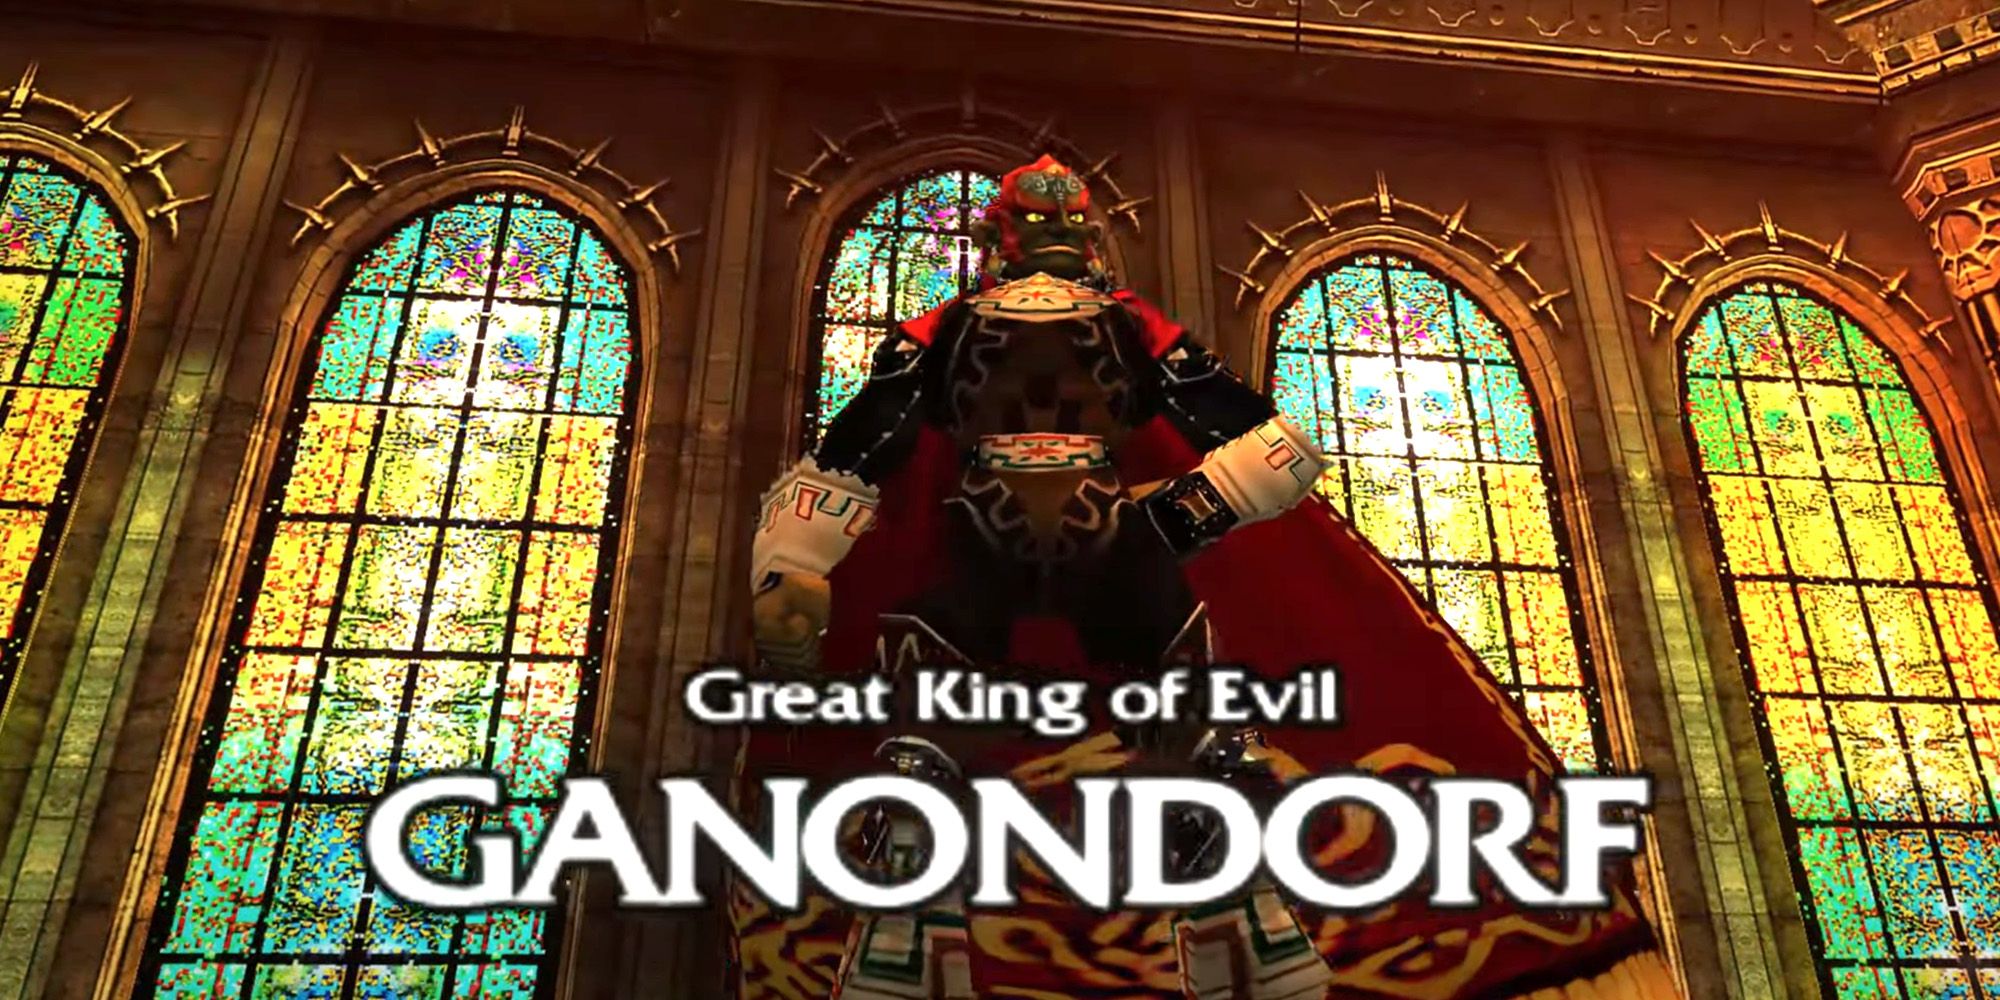 The Legend Of Zelda Ocarina Of Time - Ganondorf preparing to fight Link during the final boss